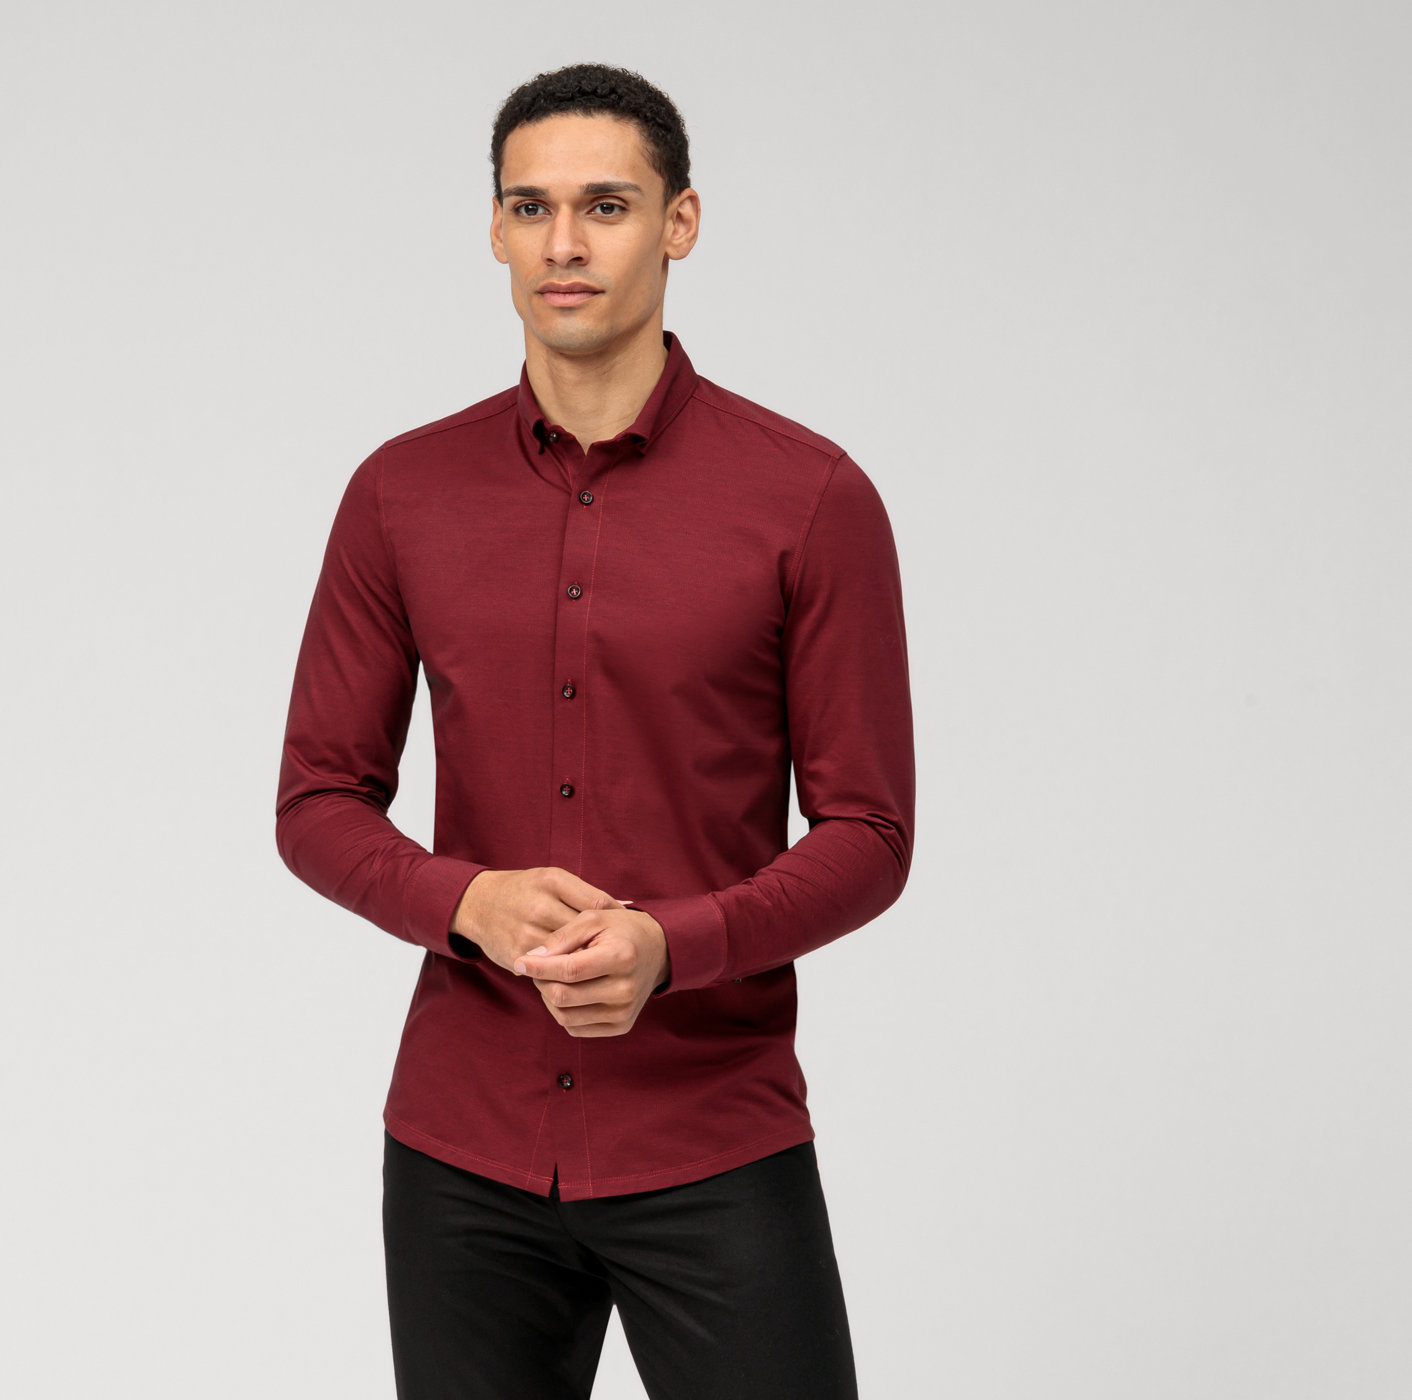 fit, | OLYMP body Level - Rot 24/Seven, Five Button-down 20444435 Businesshemd |